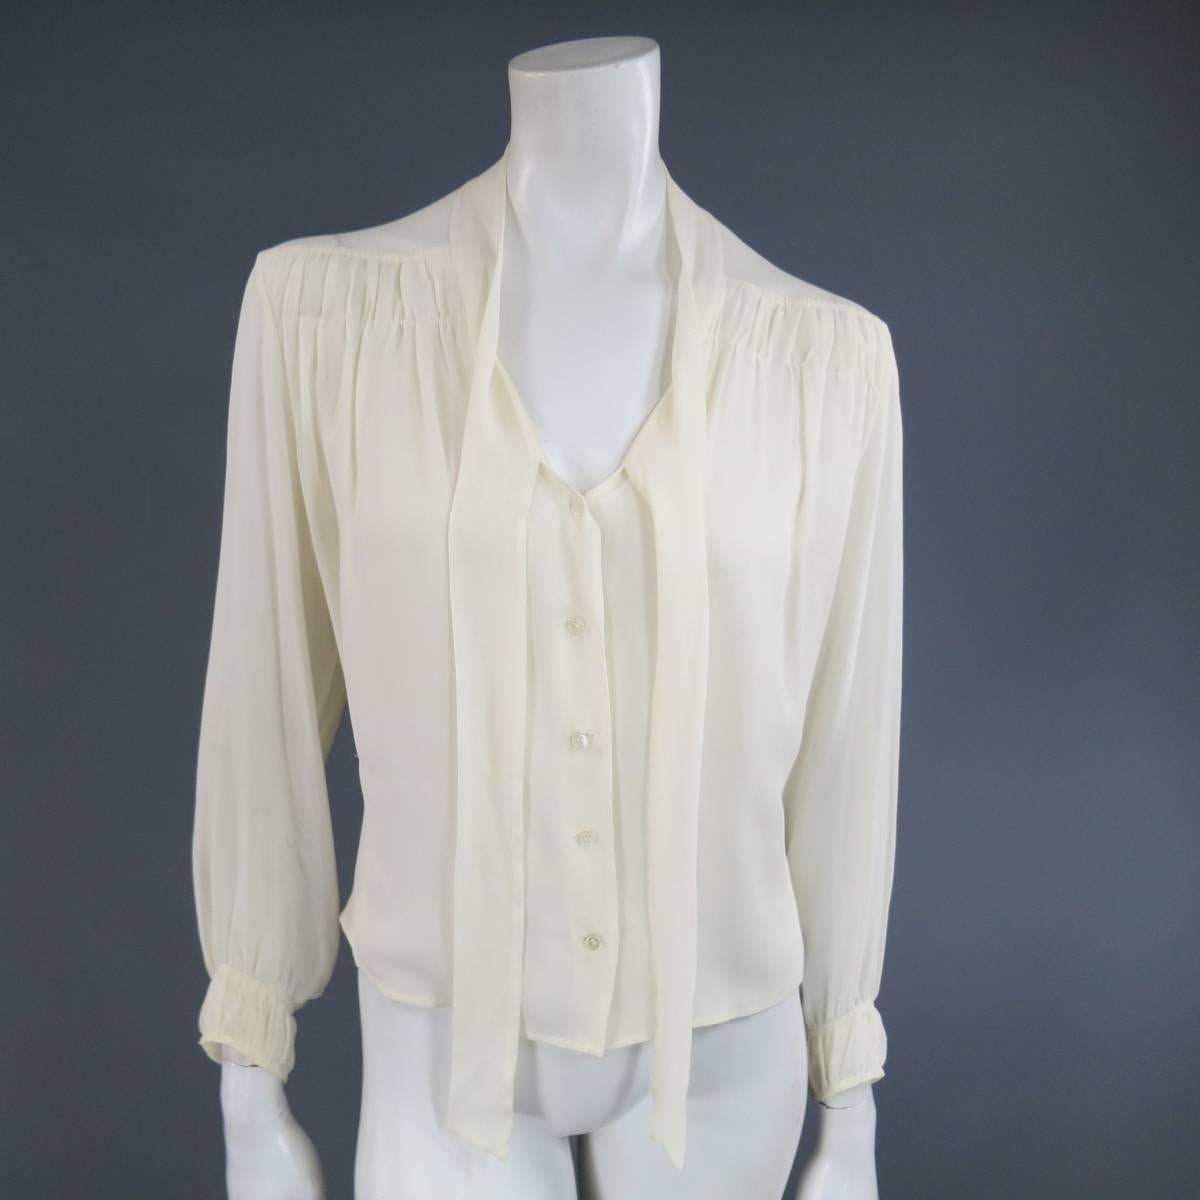 This gorgeous vintage HERMES blouse comes in an off white cream silk textured sheer chiffon and features a v neck, button up front, sheer panel shoulders, gathered back, gathered cuffs, and a tied bow. Minor discolorations on neck. Made in France.
